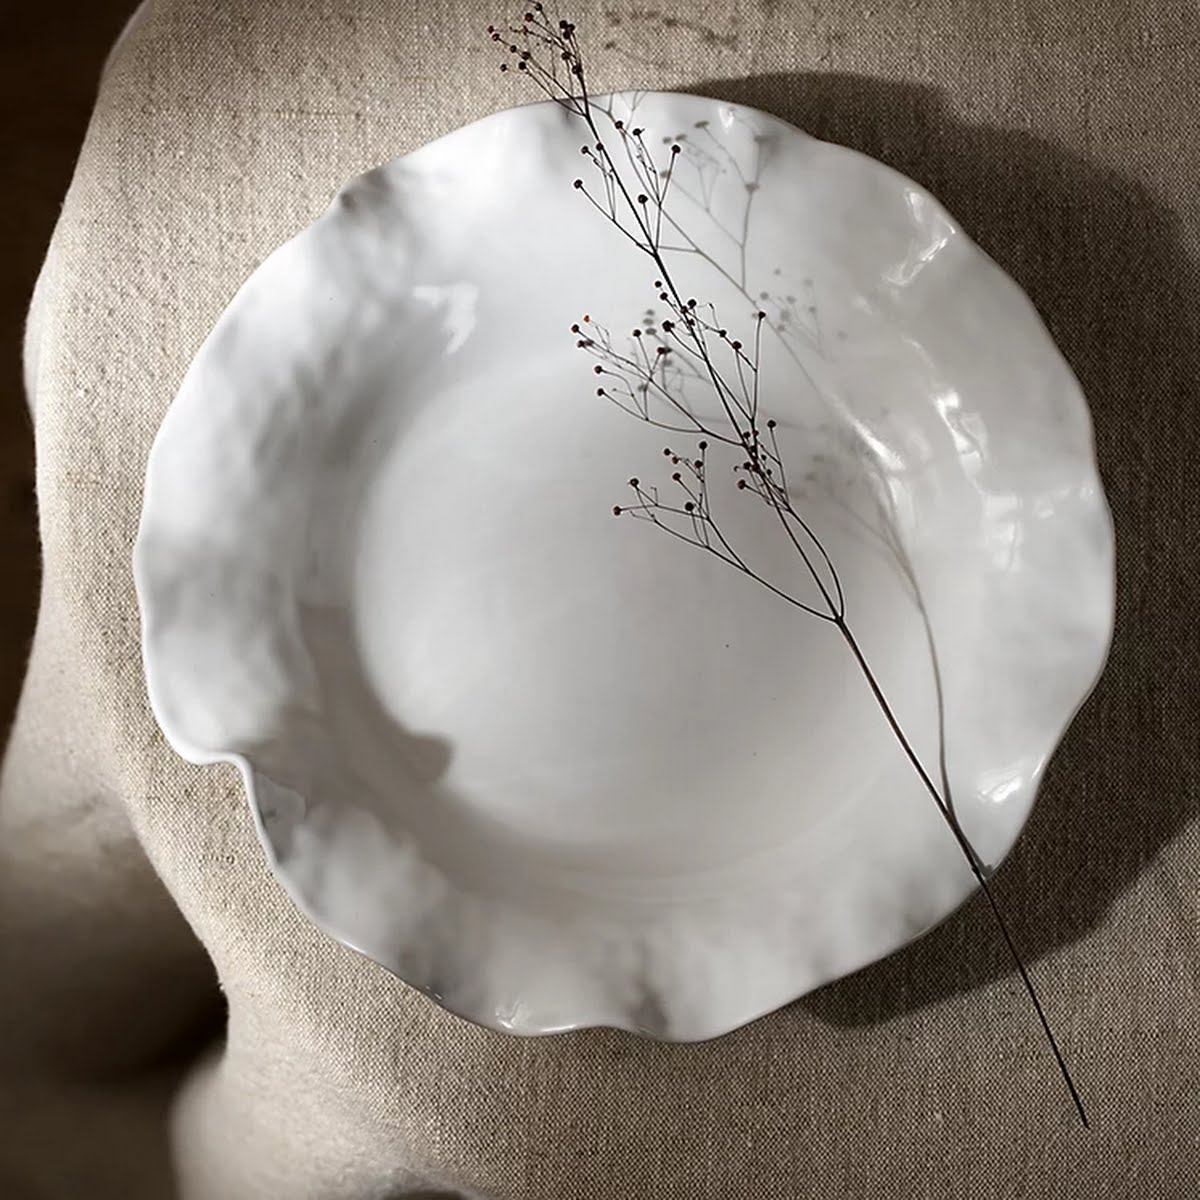 The White Company Colwyn Ceramic Bowl, €156